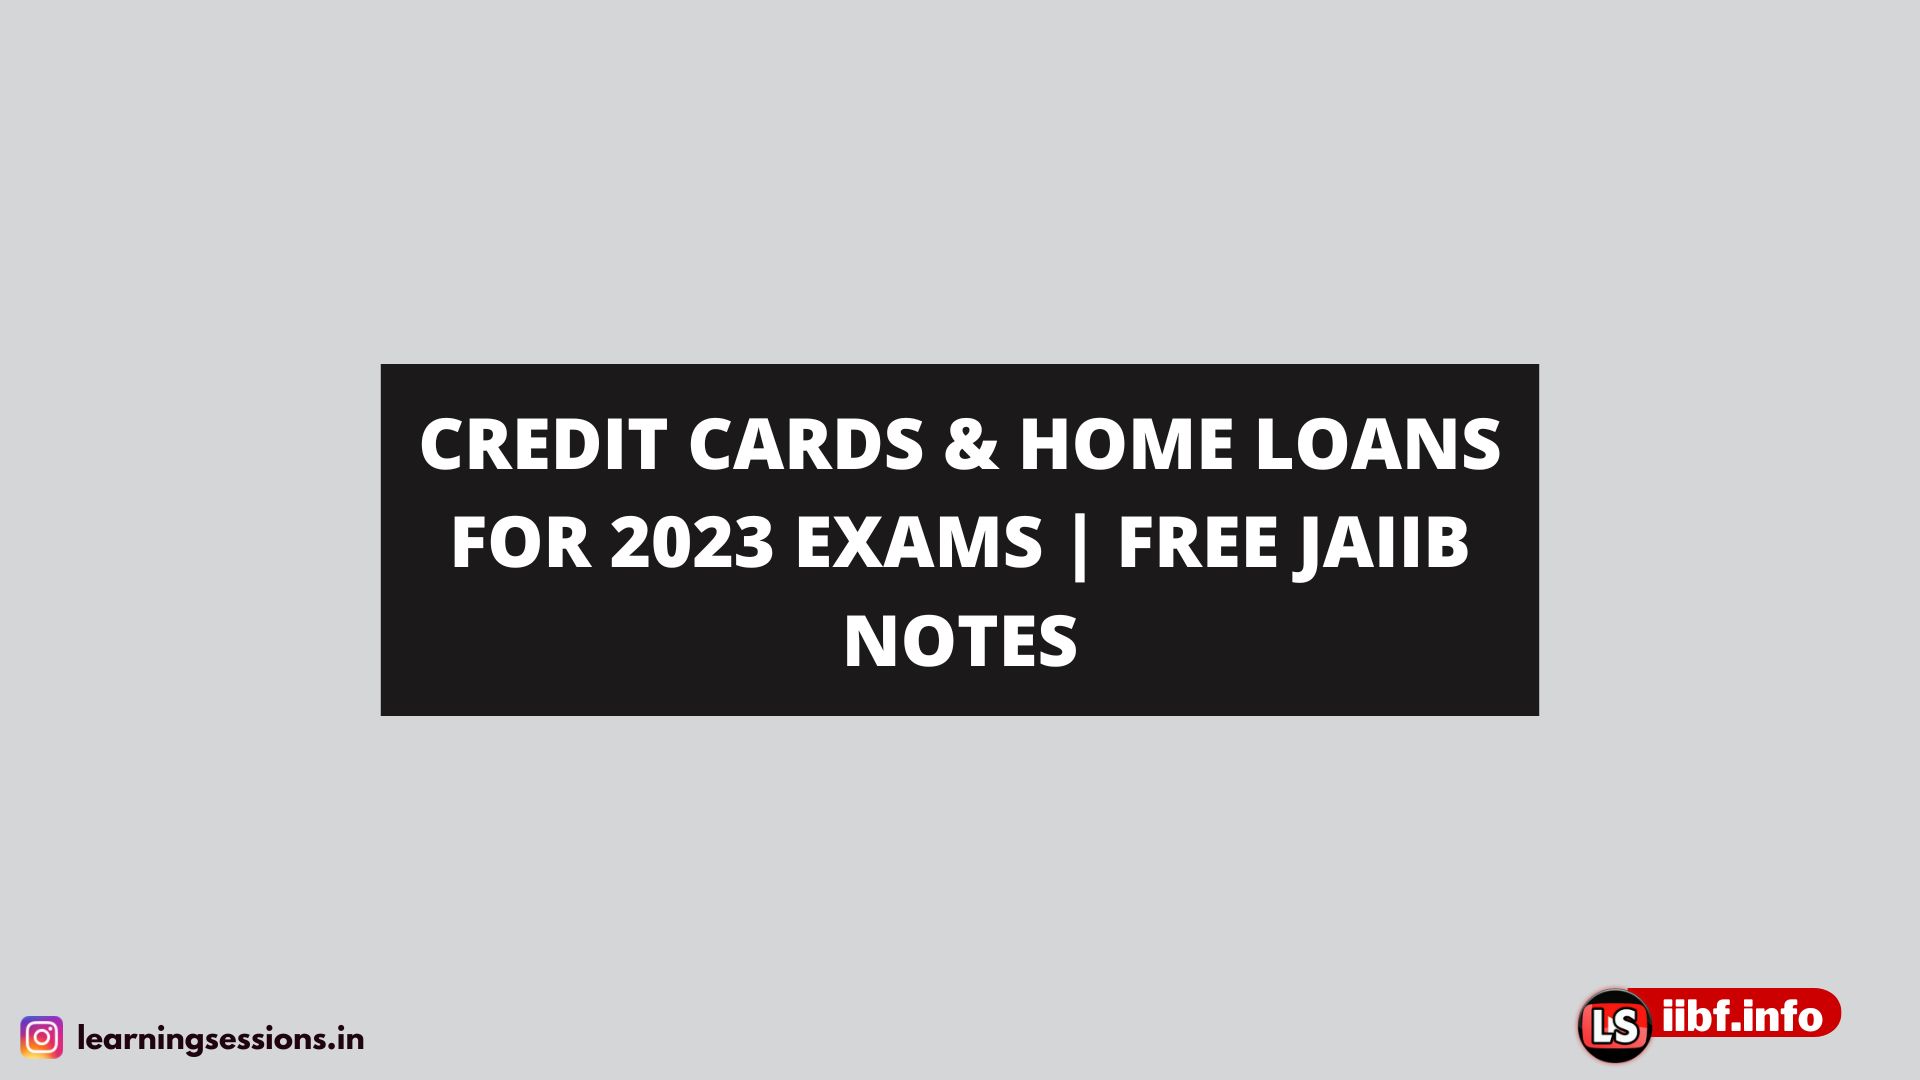 CREDIT CARDS & HOME LOANS FOR EXAMS | FREE JAIIB NOTES